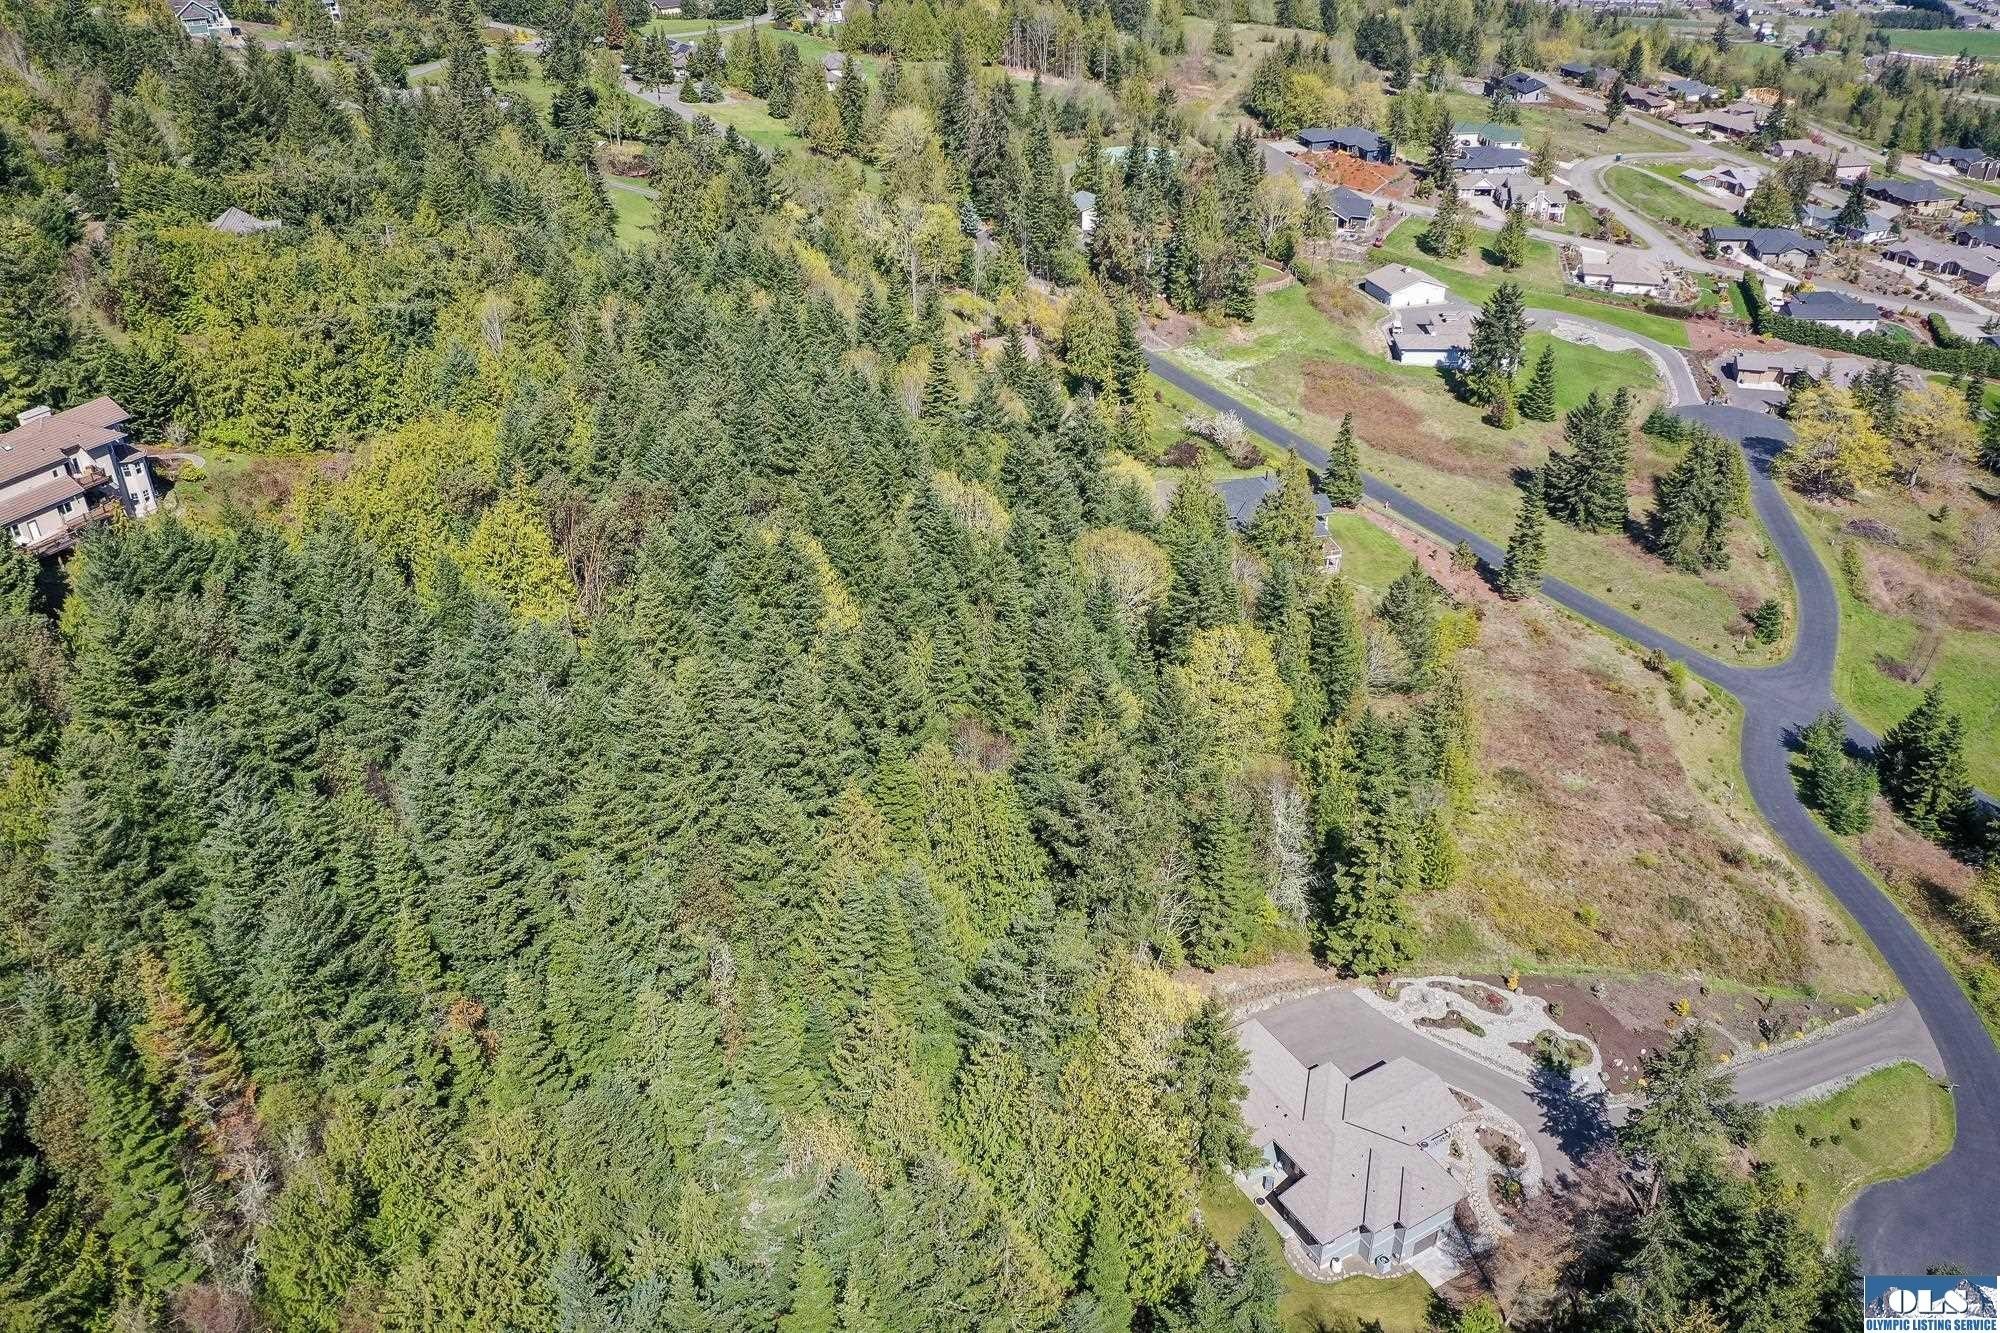 9. Lot 15 High View Way